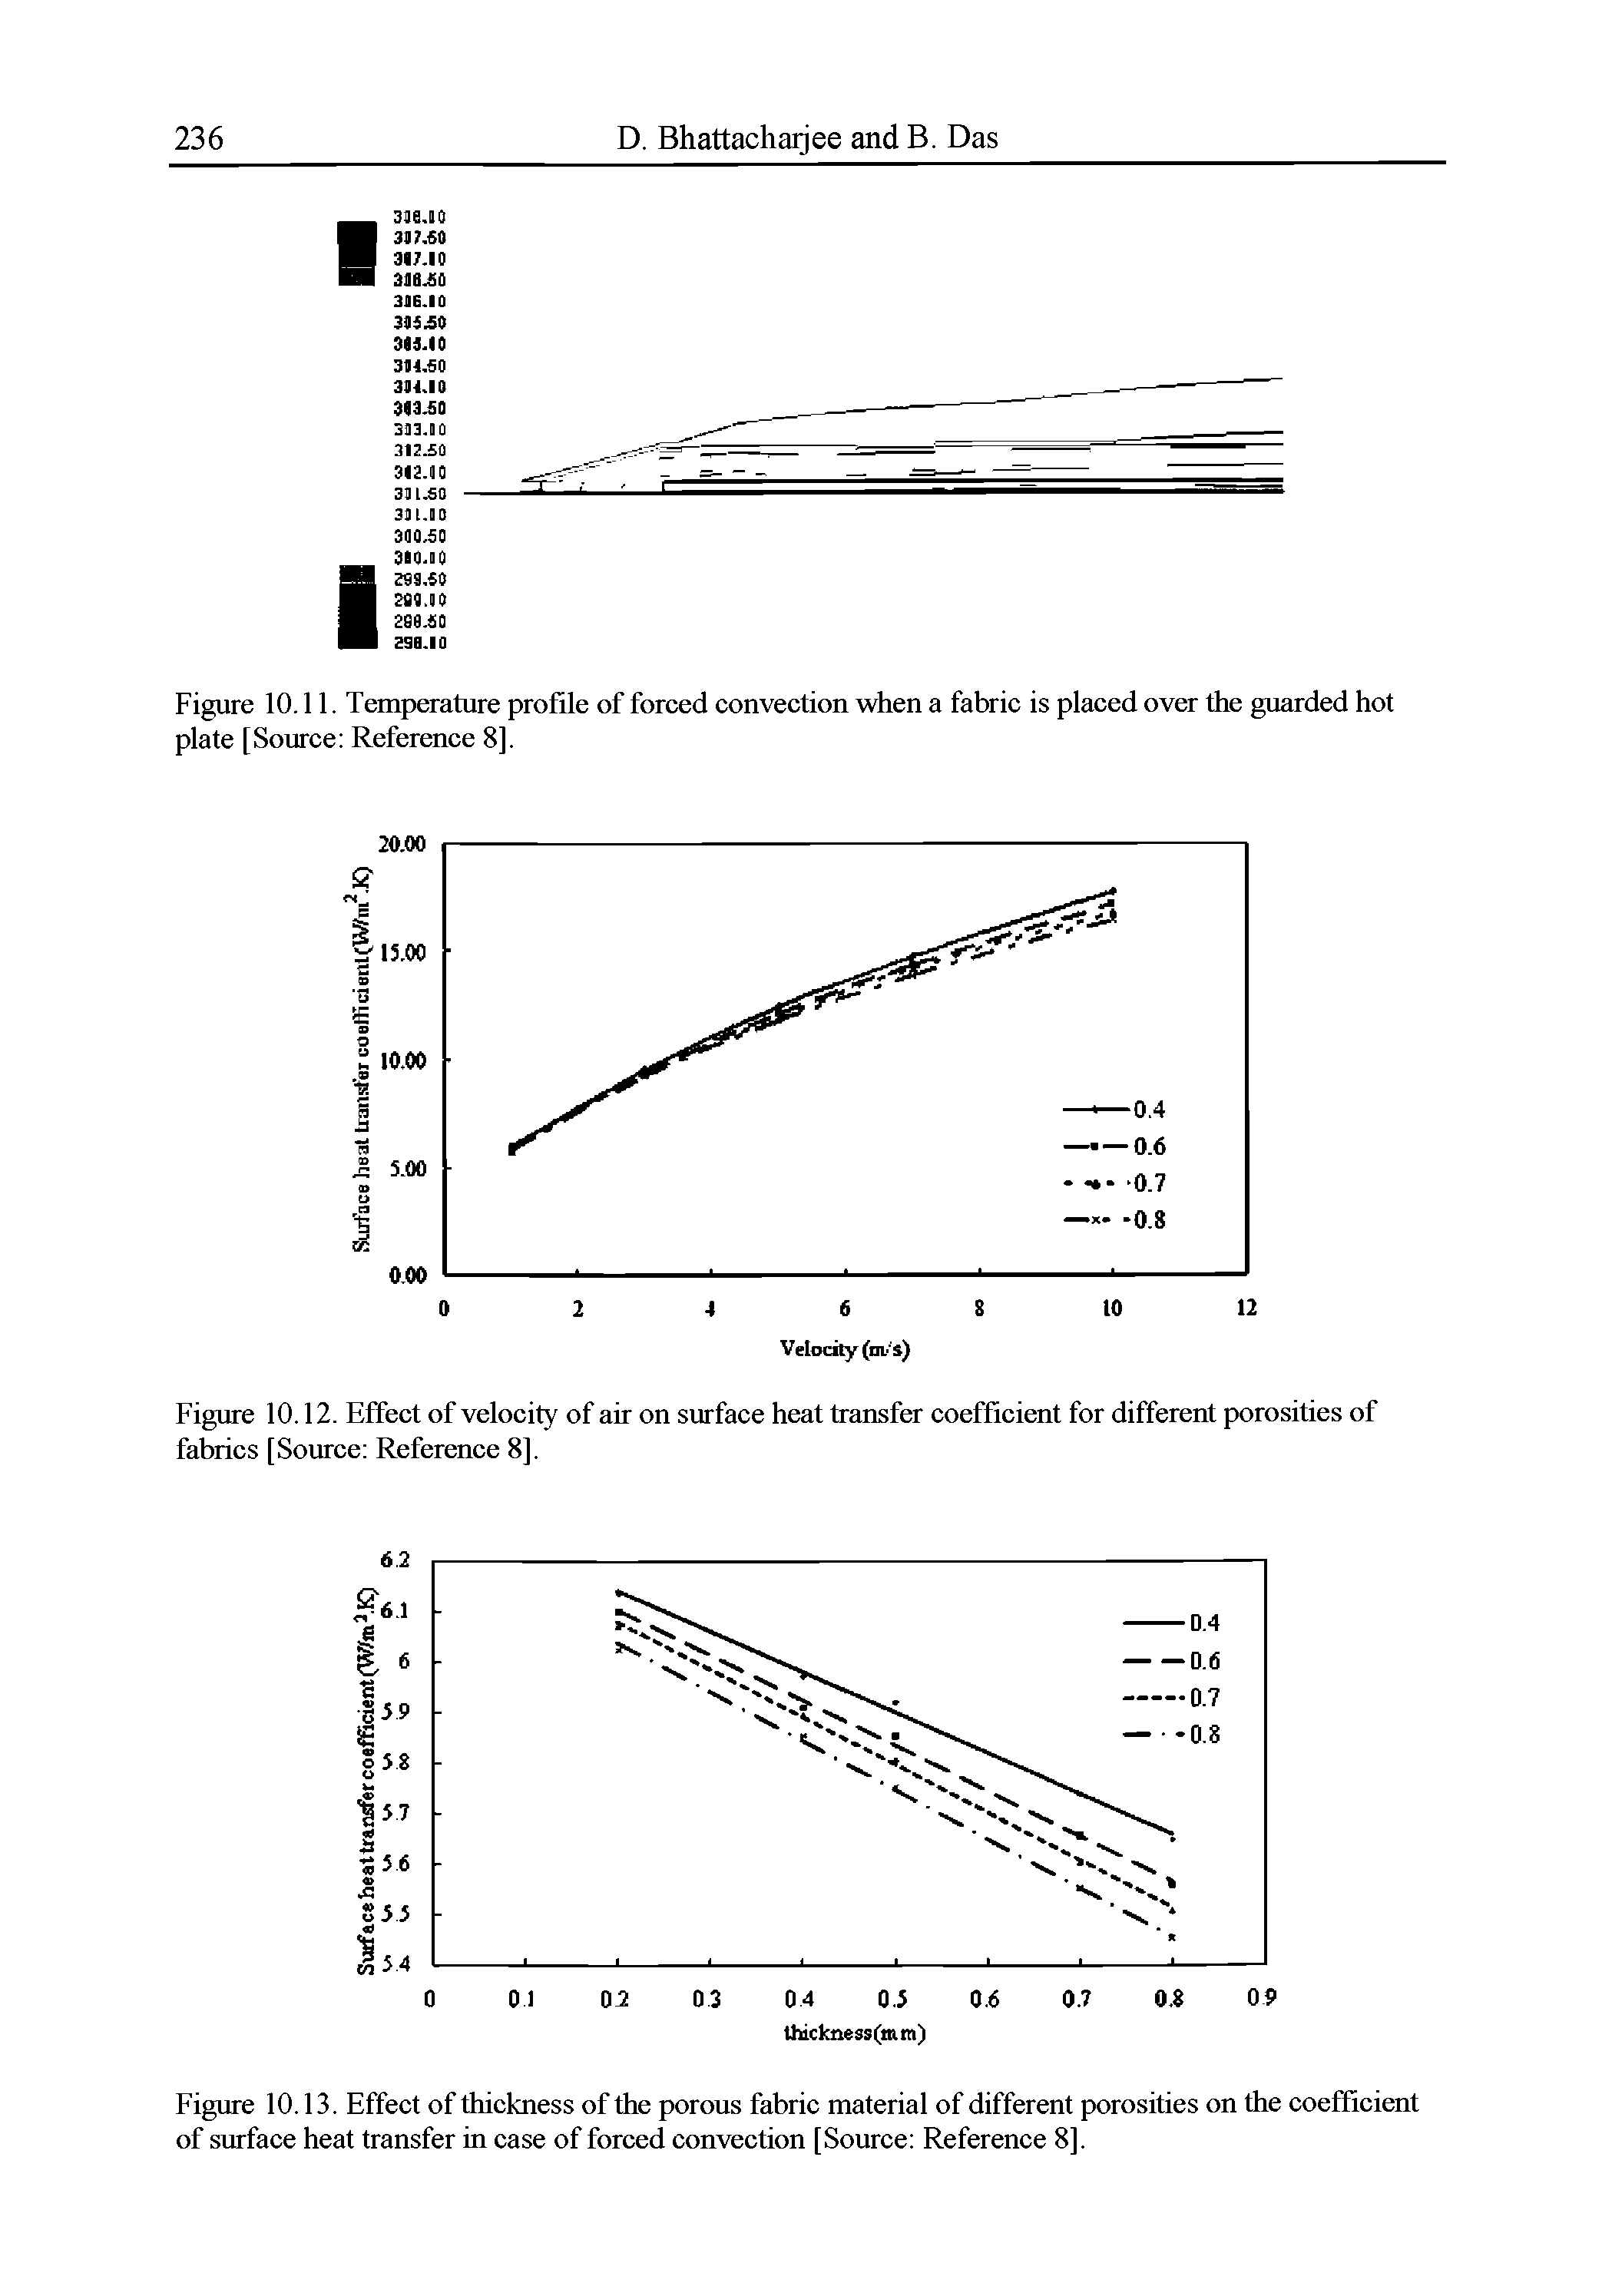 Figure 10.13. Effect of thickness of the porous fabric material of different porosities on the coefficient of surface heat transfer in case of forced convection [Source Reference 8].